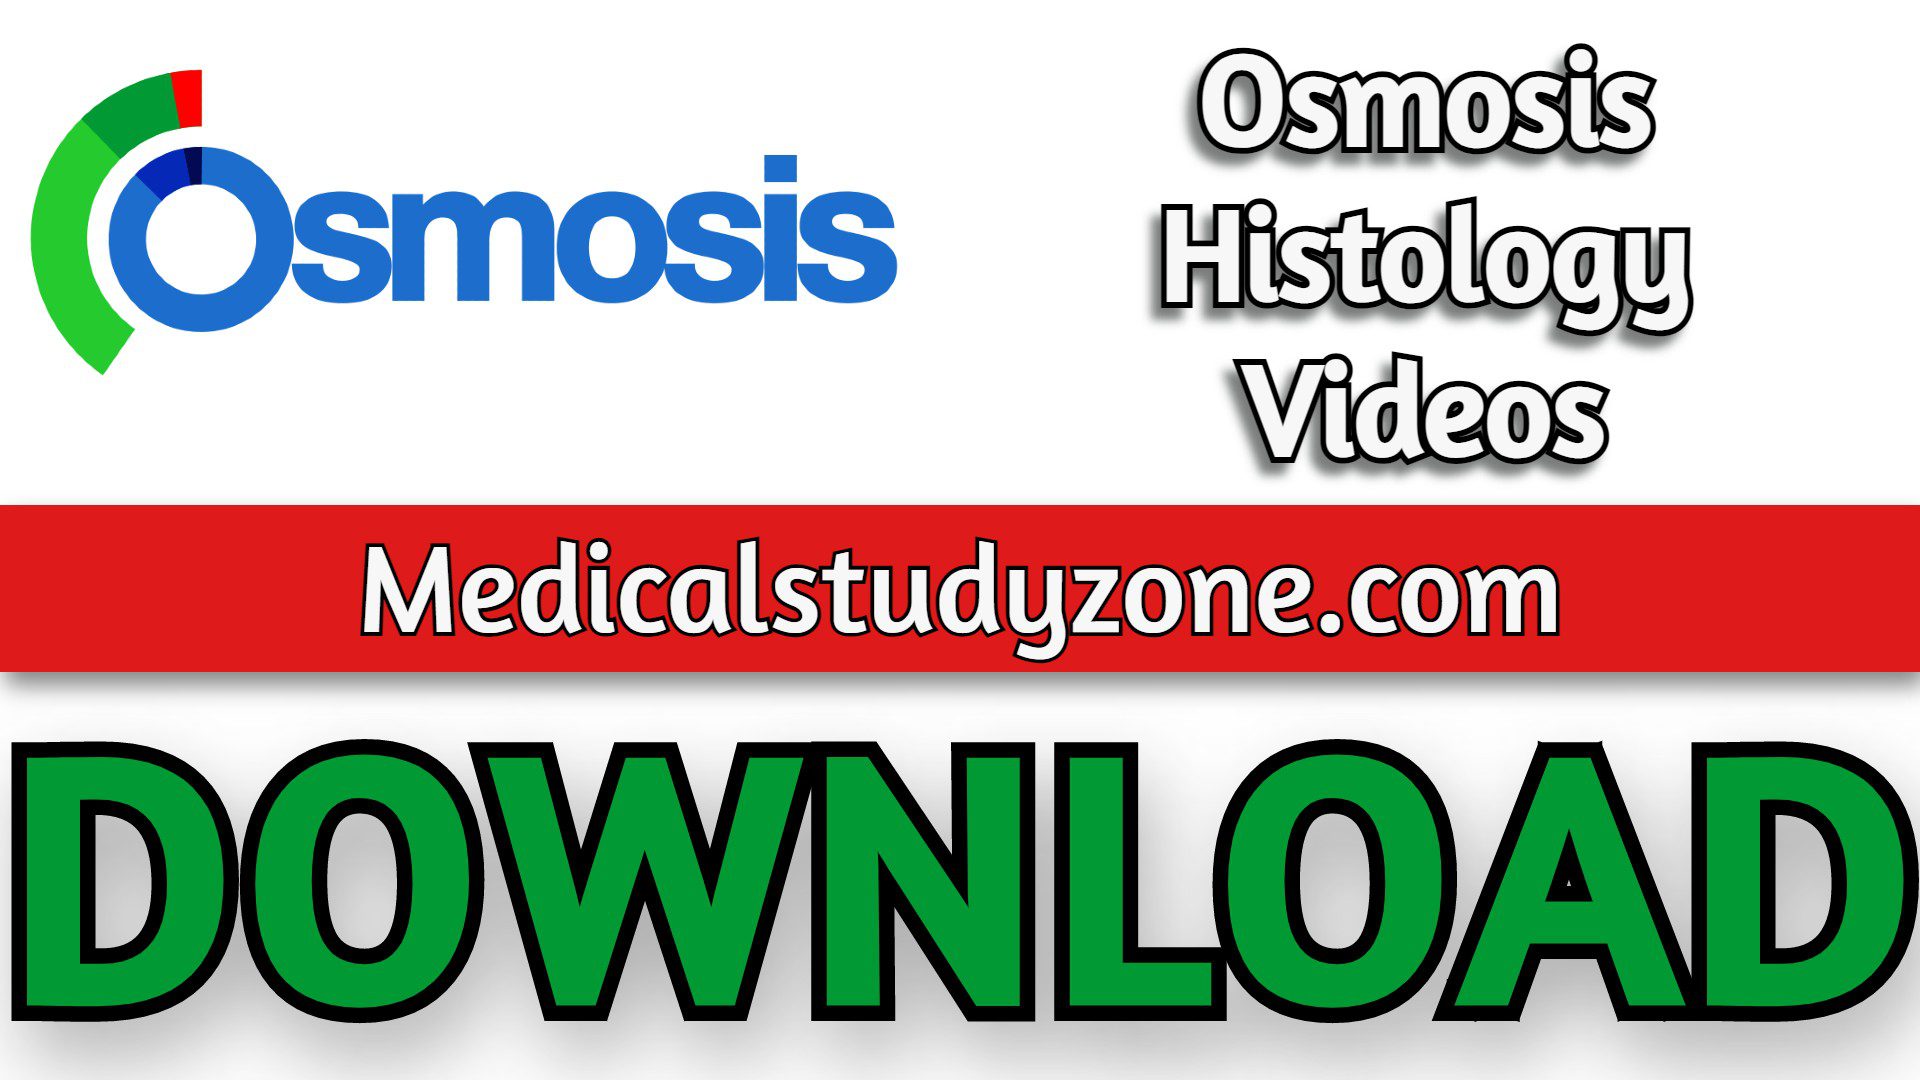 Osmosis Histology Videos 2023 Free Download